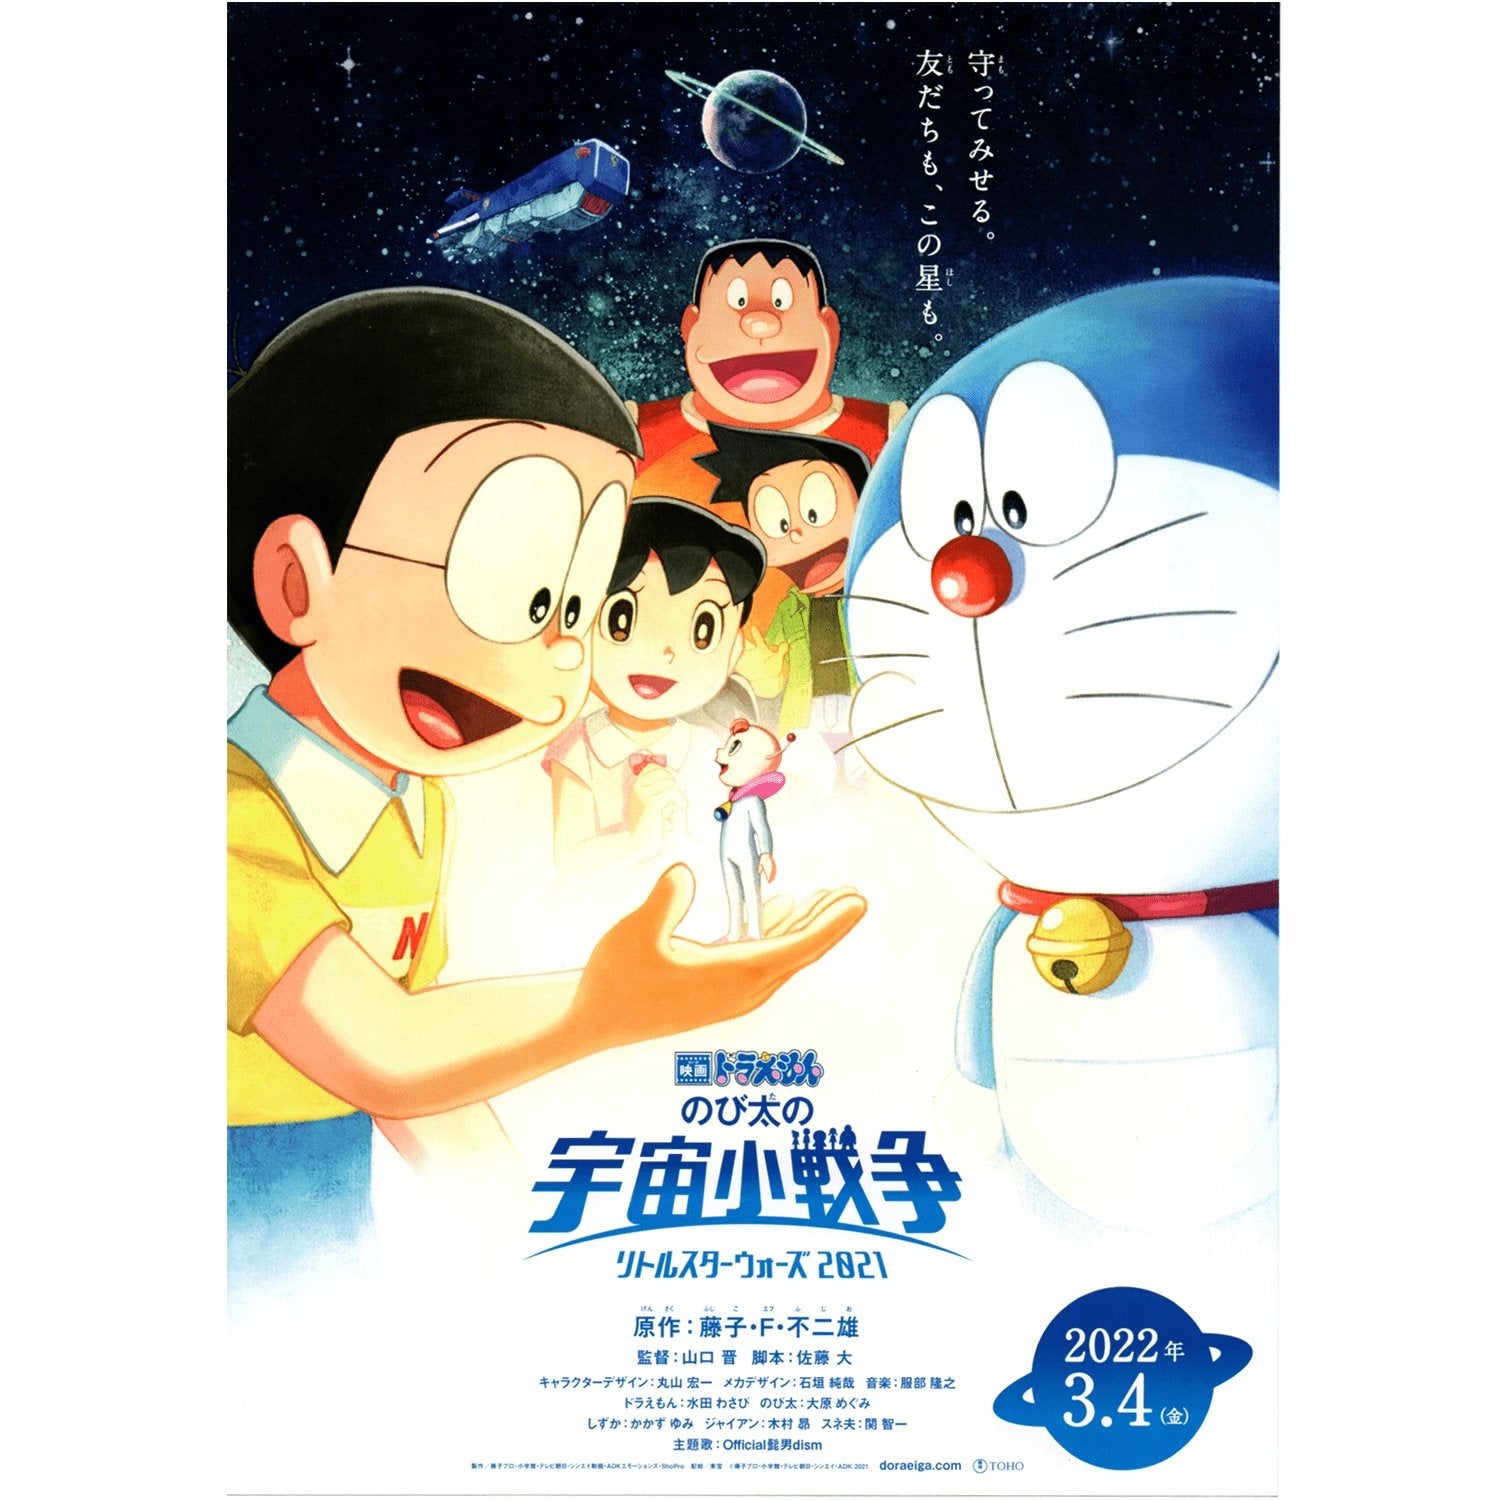 Classic anime series 'Doraemon' comes to UK TV | WIRED UK